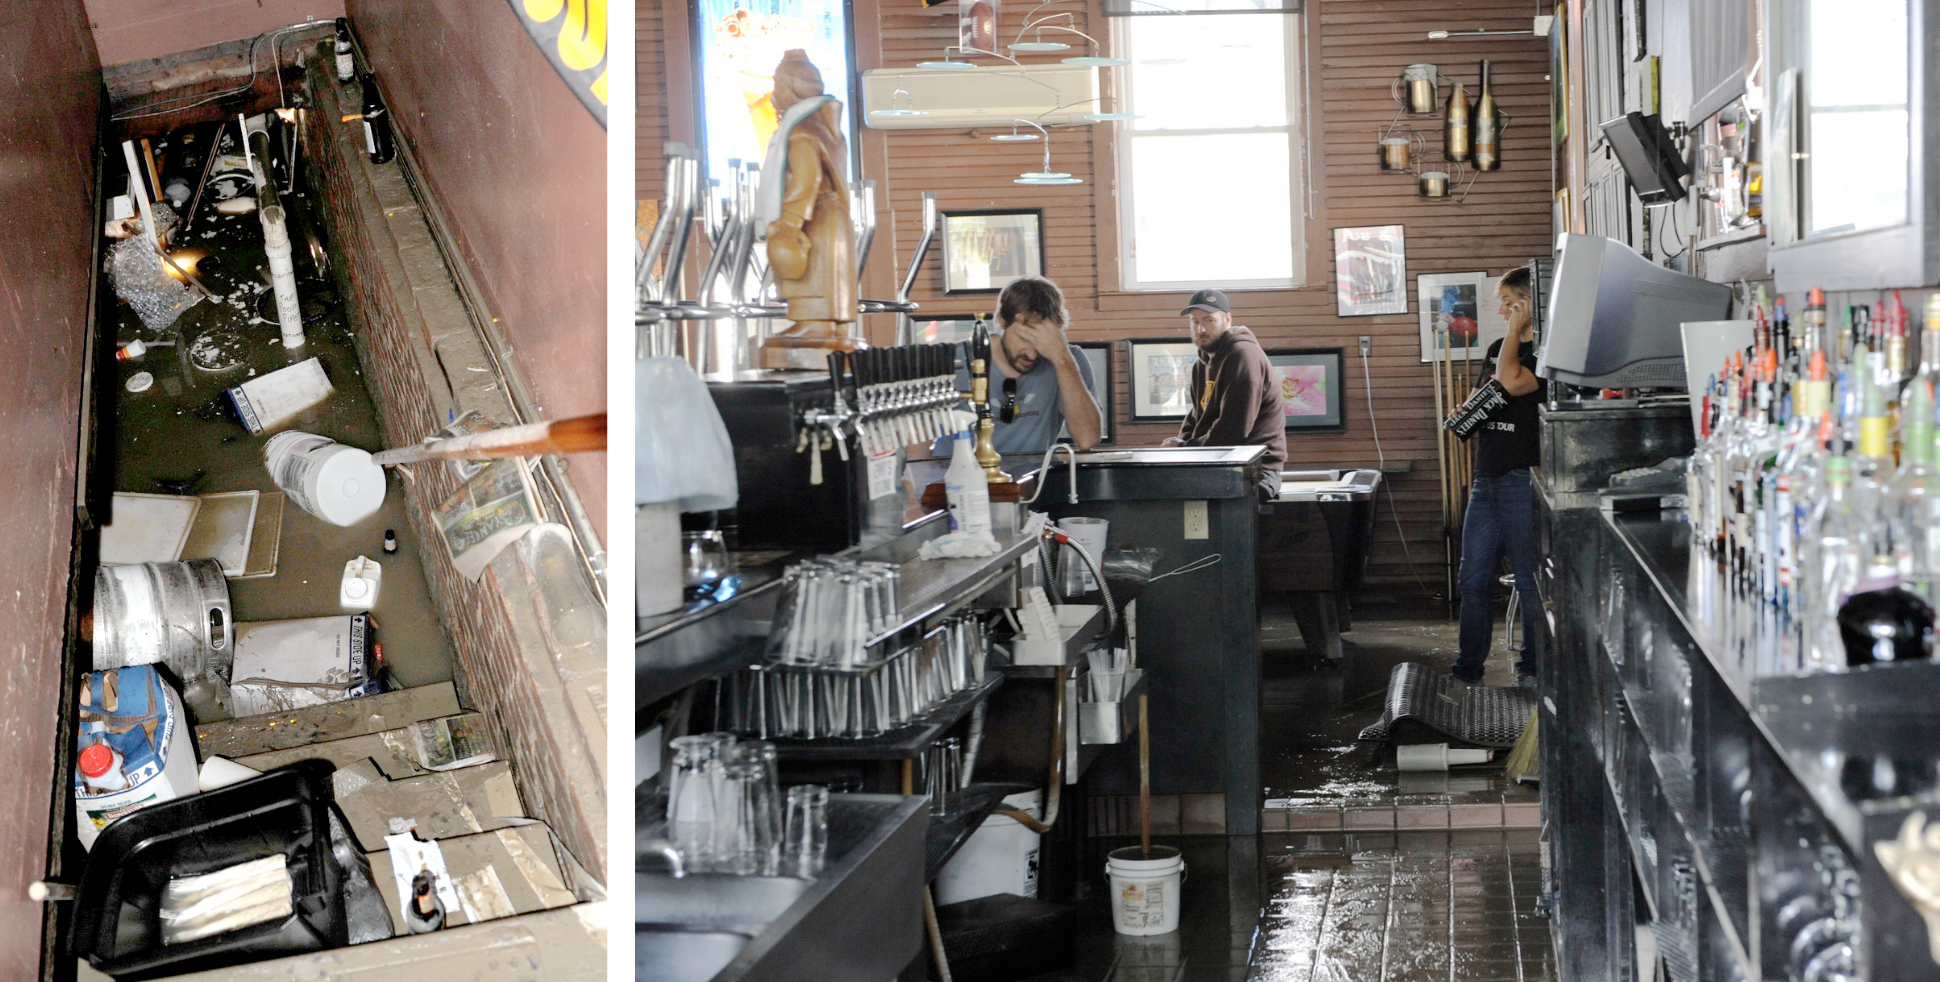 two photos side by side of flood damage that Hurricane Irene brought to the original Alchemist pub, courtesy